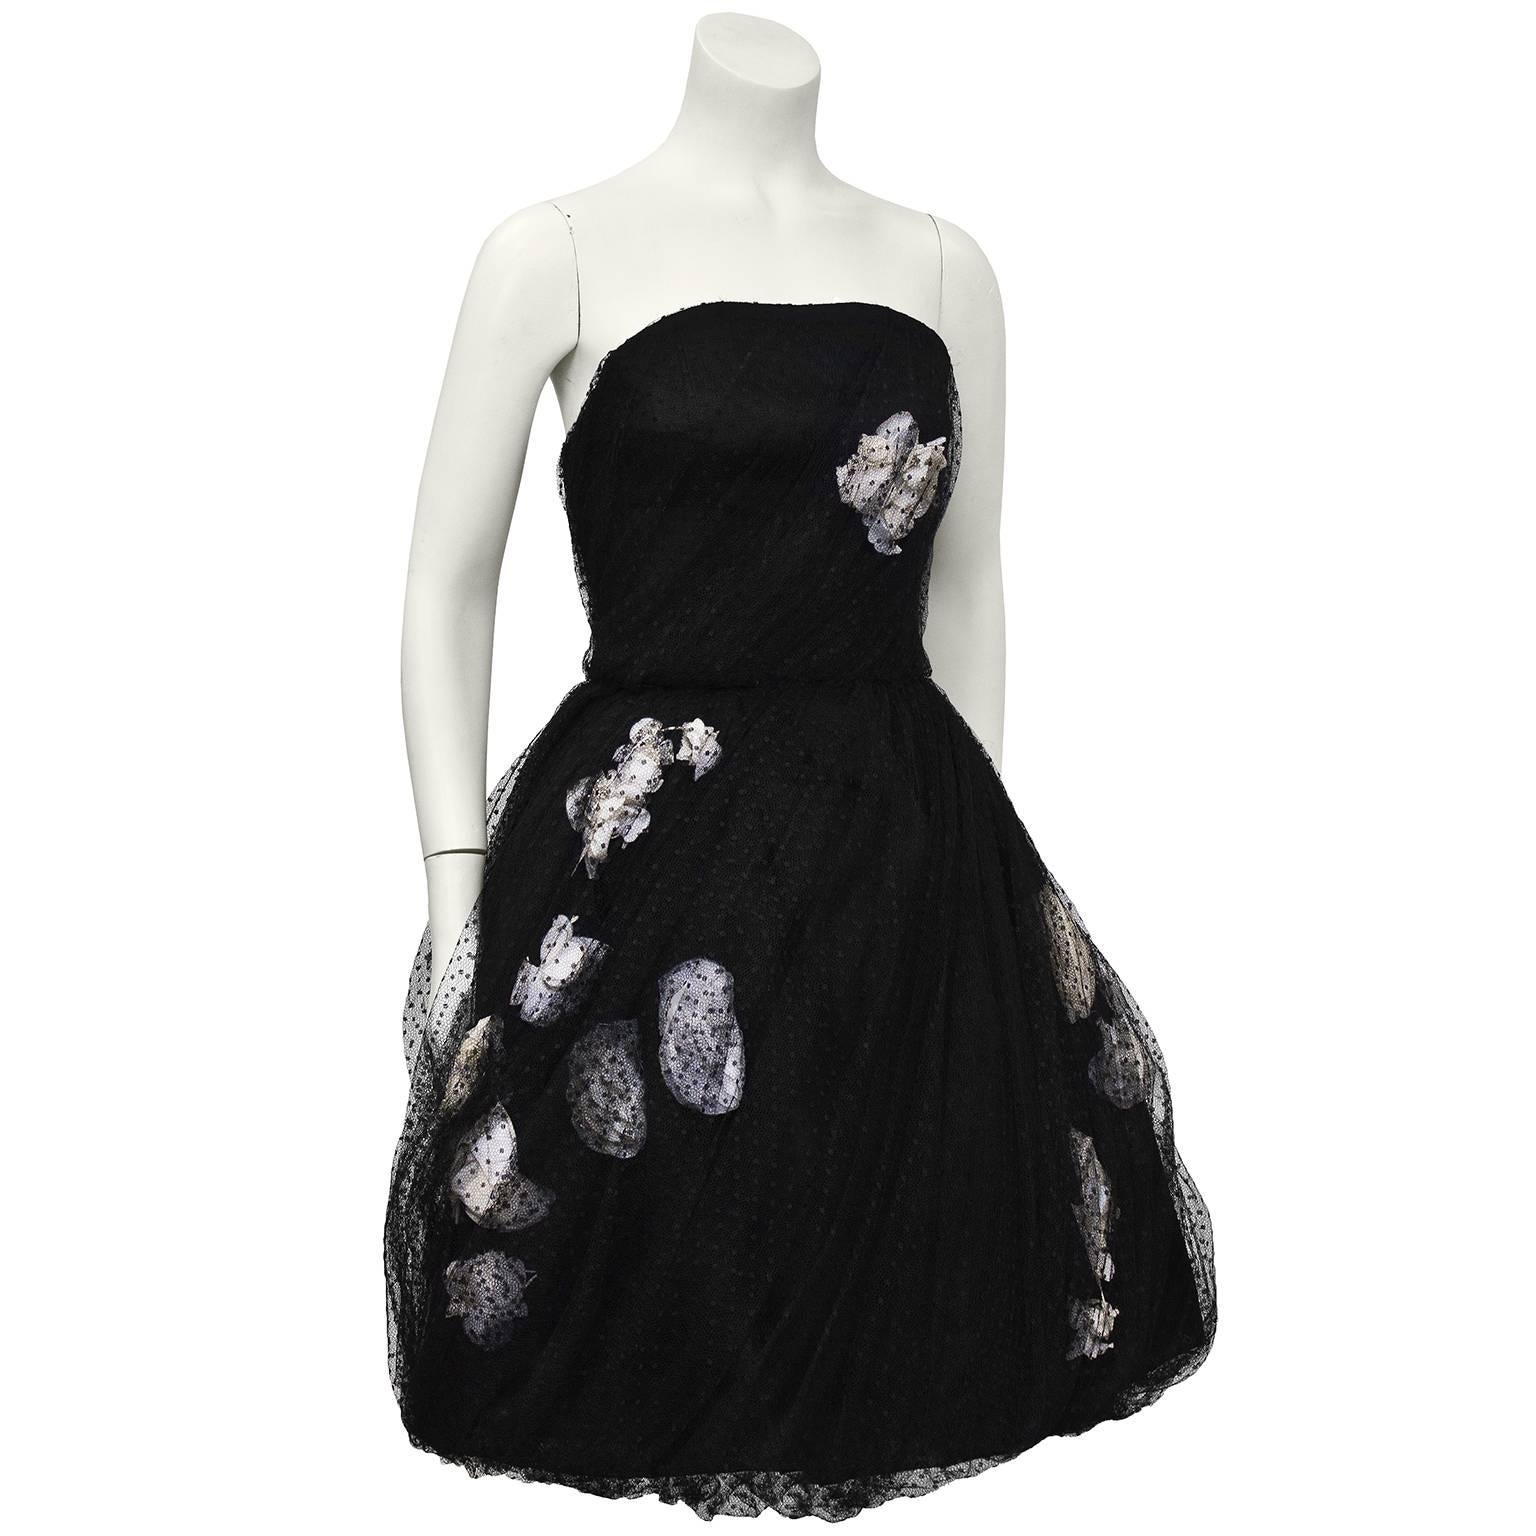 As seen on the beautiful actress Anne Hathaway. Simply exquisite 1960's black tulle pointe d'esprit strapless haute couture cocktail dress. Lush white gardenias are clustered in the bodice and full skirt to add a unique touch. Small fit, fully boned